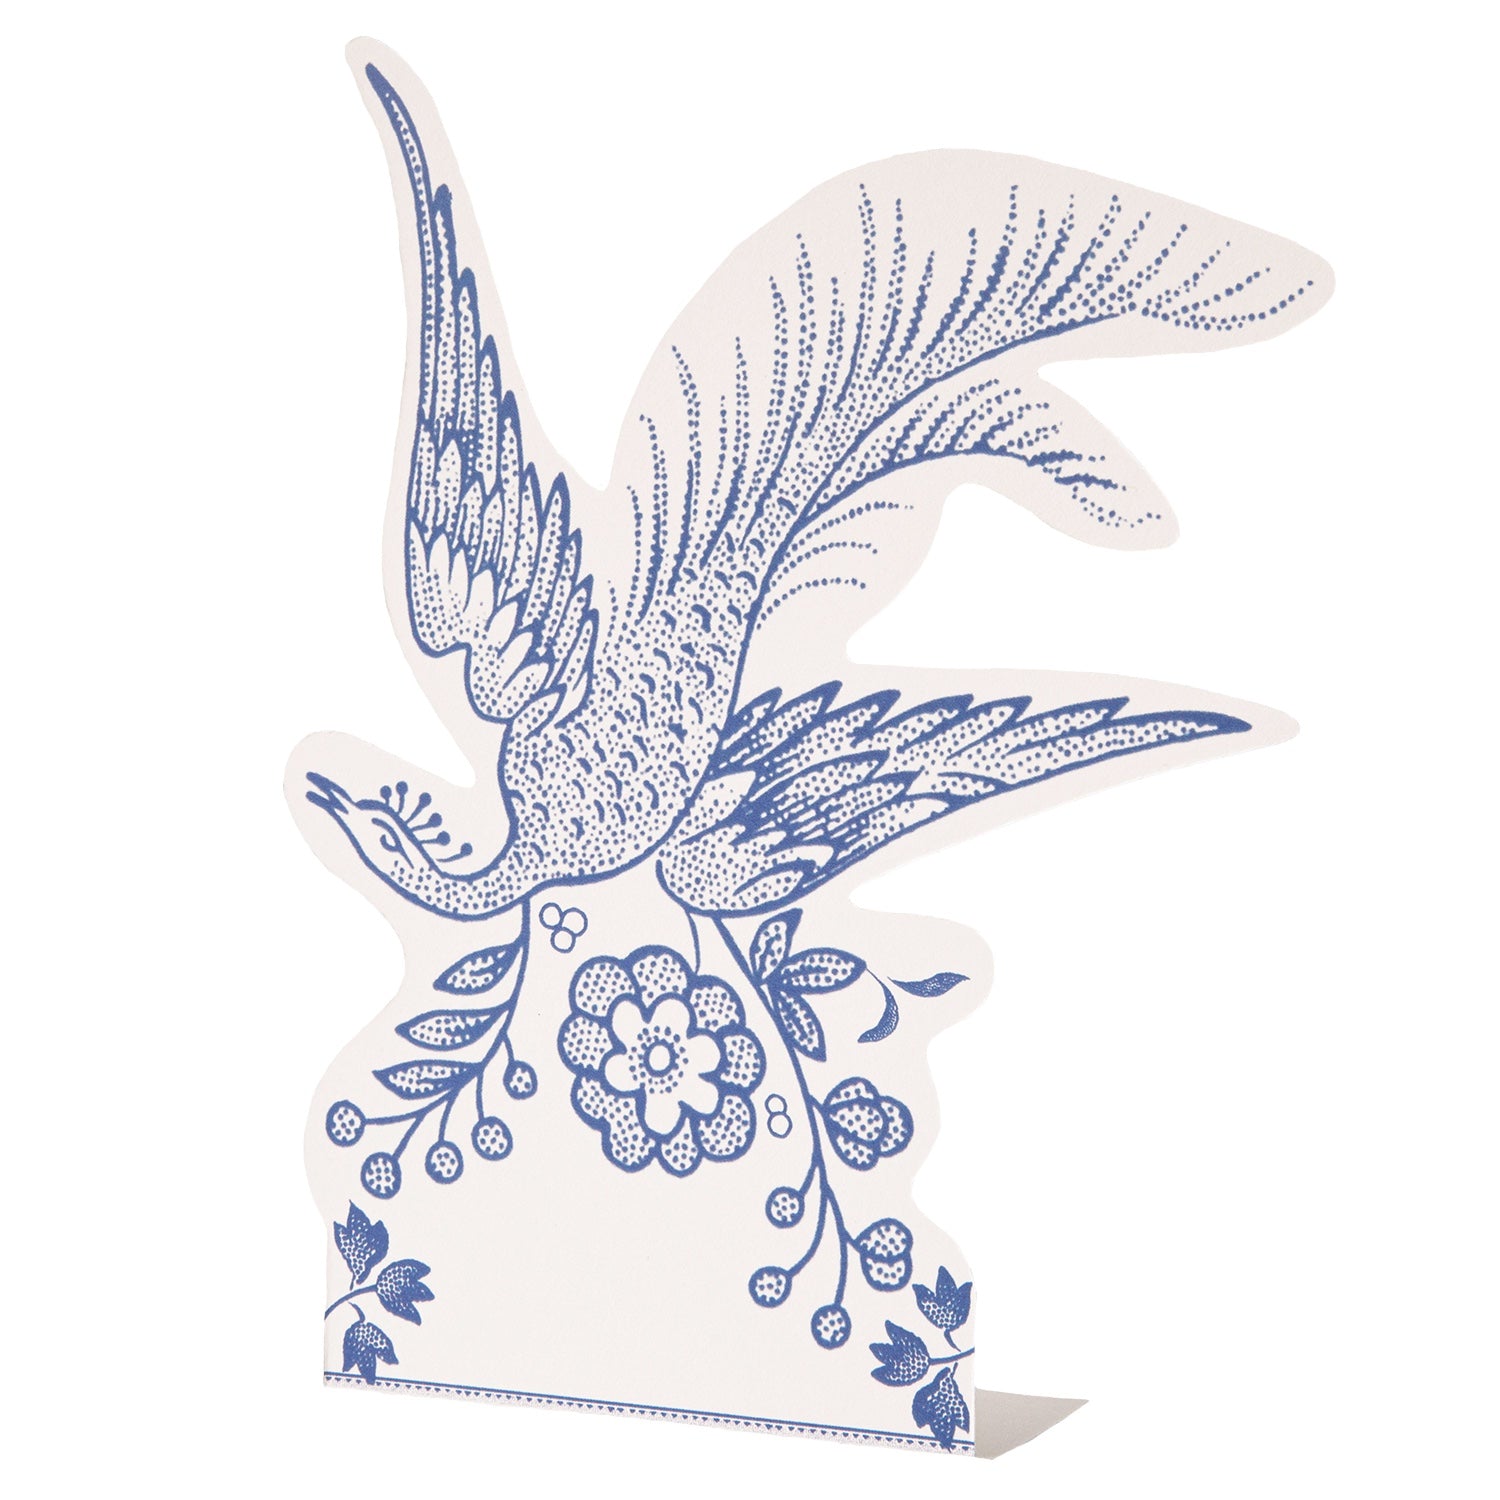 A Hester &amp; Cook Blue Asiatic Pheasants Place Card on a white background.